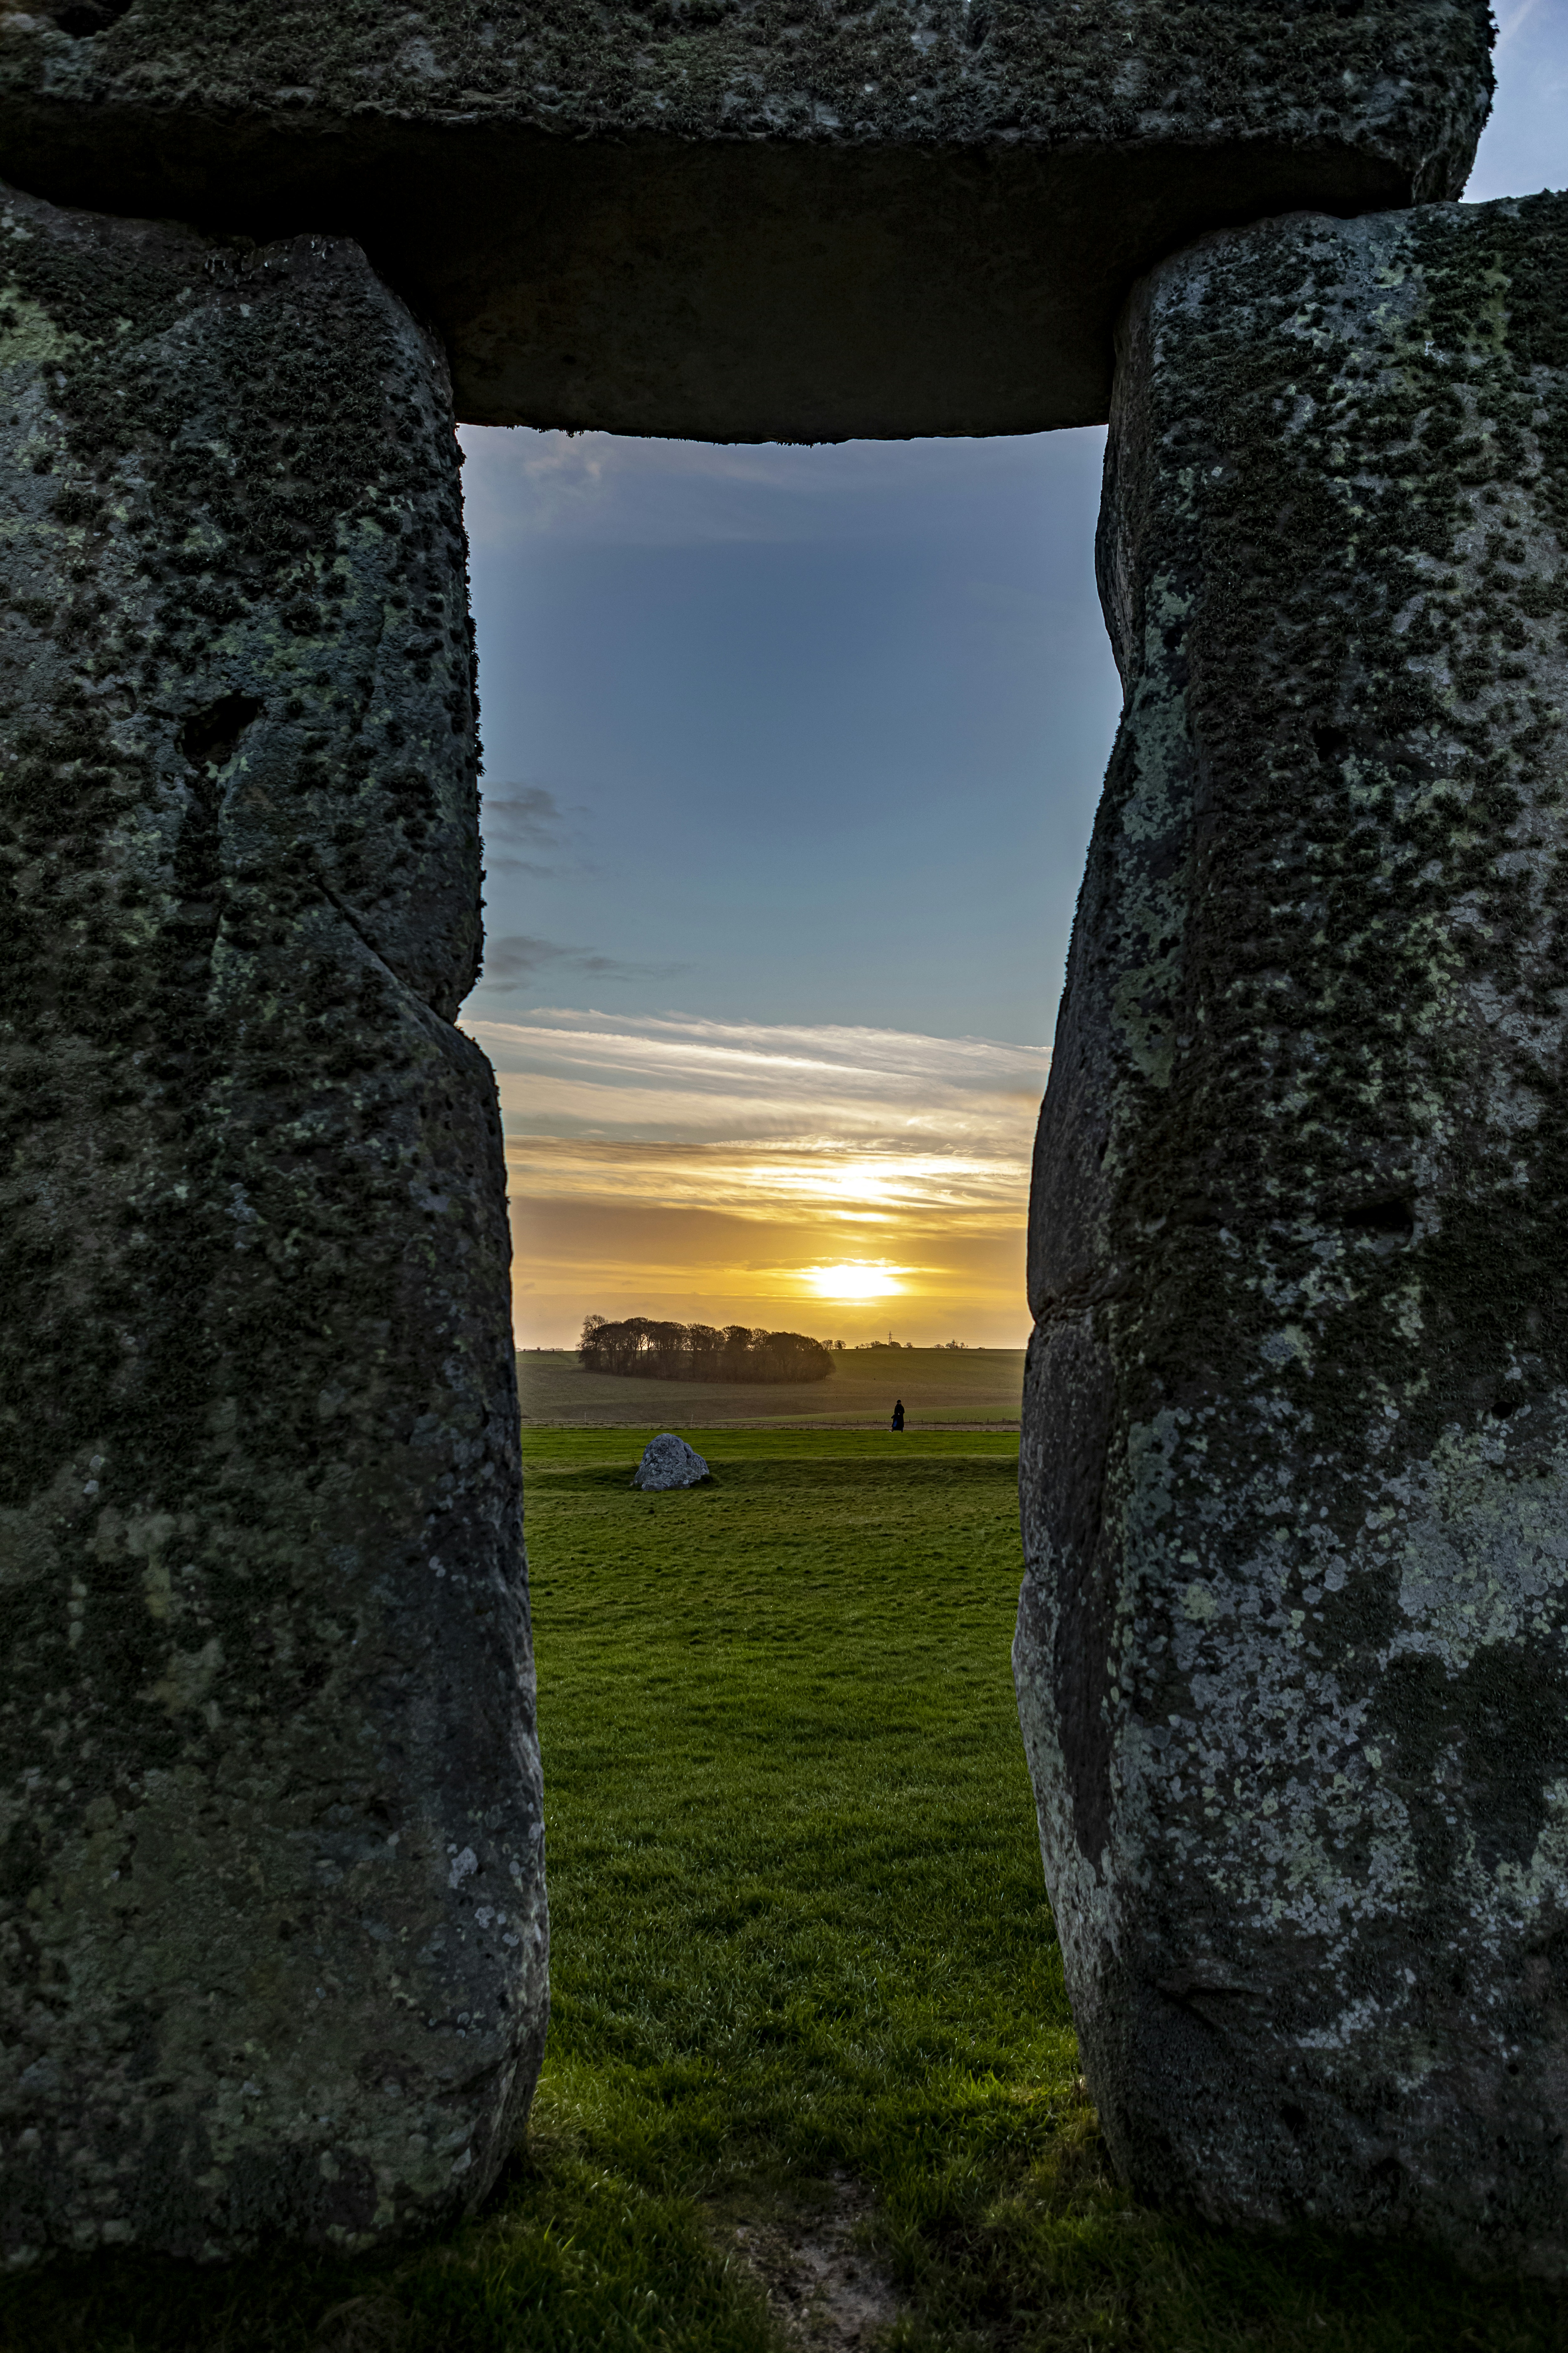 Prehistoric ritual site of Stonehenge with monliths - large stone slabs in rural England, UK. February 2020. Sunrise time.